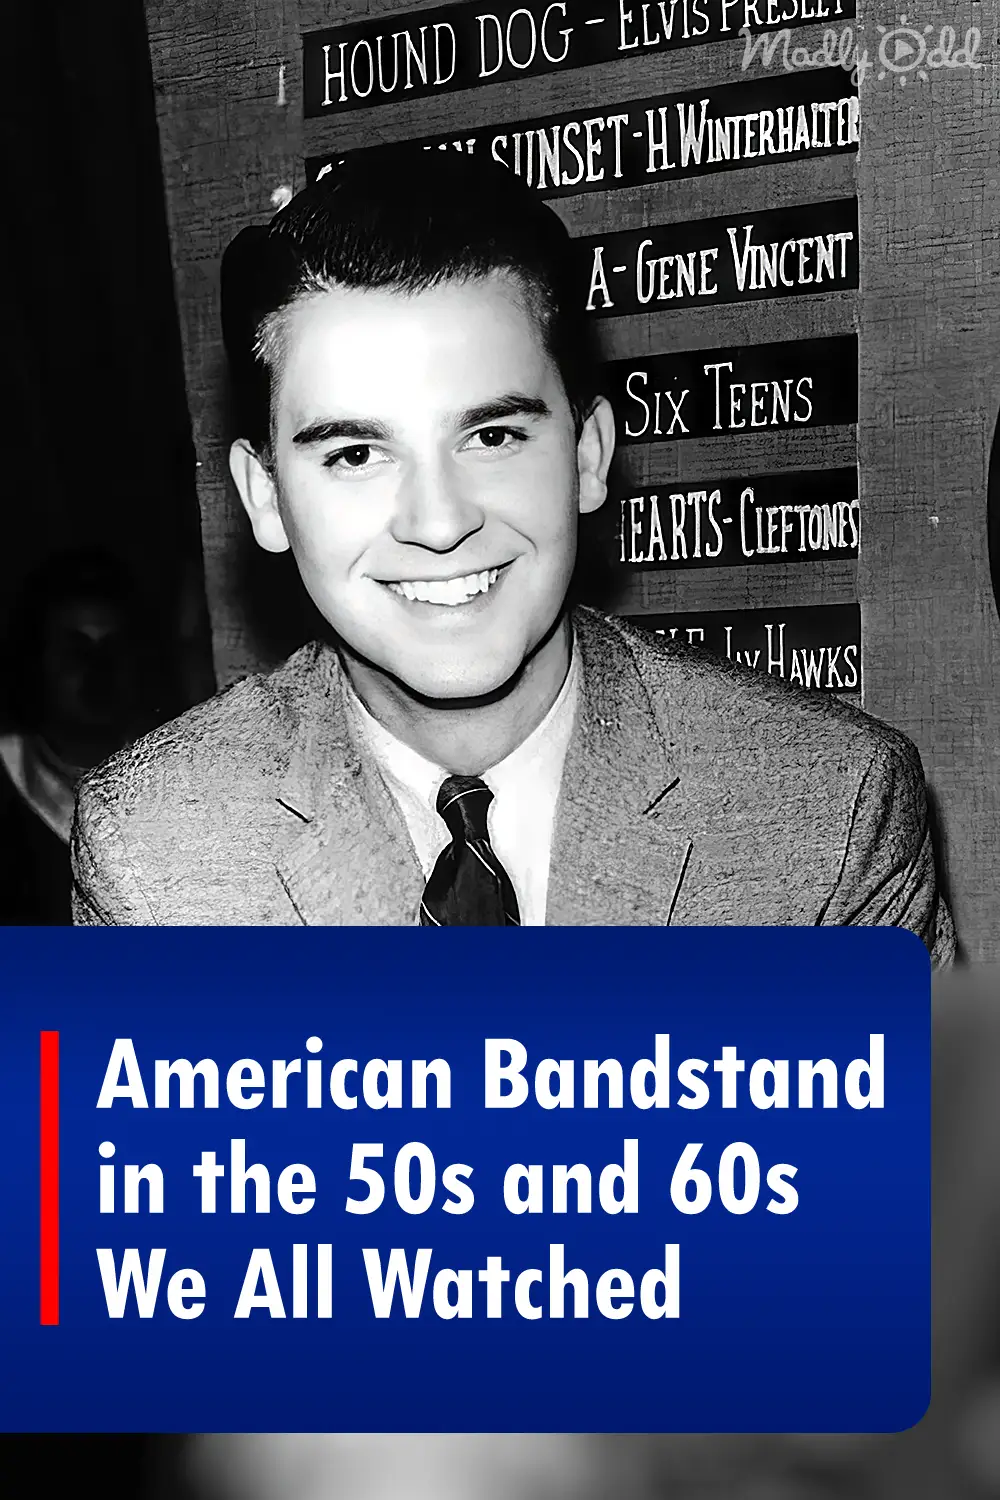 American Bandstand in the 50s and 60s We All Watched